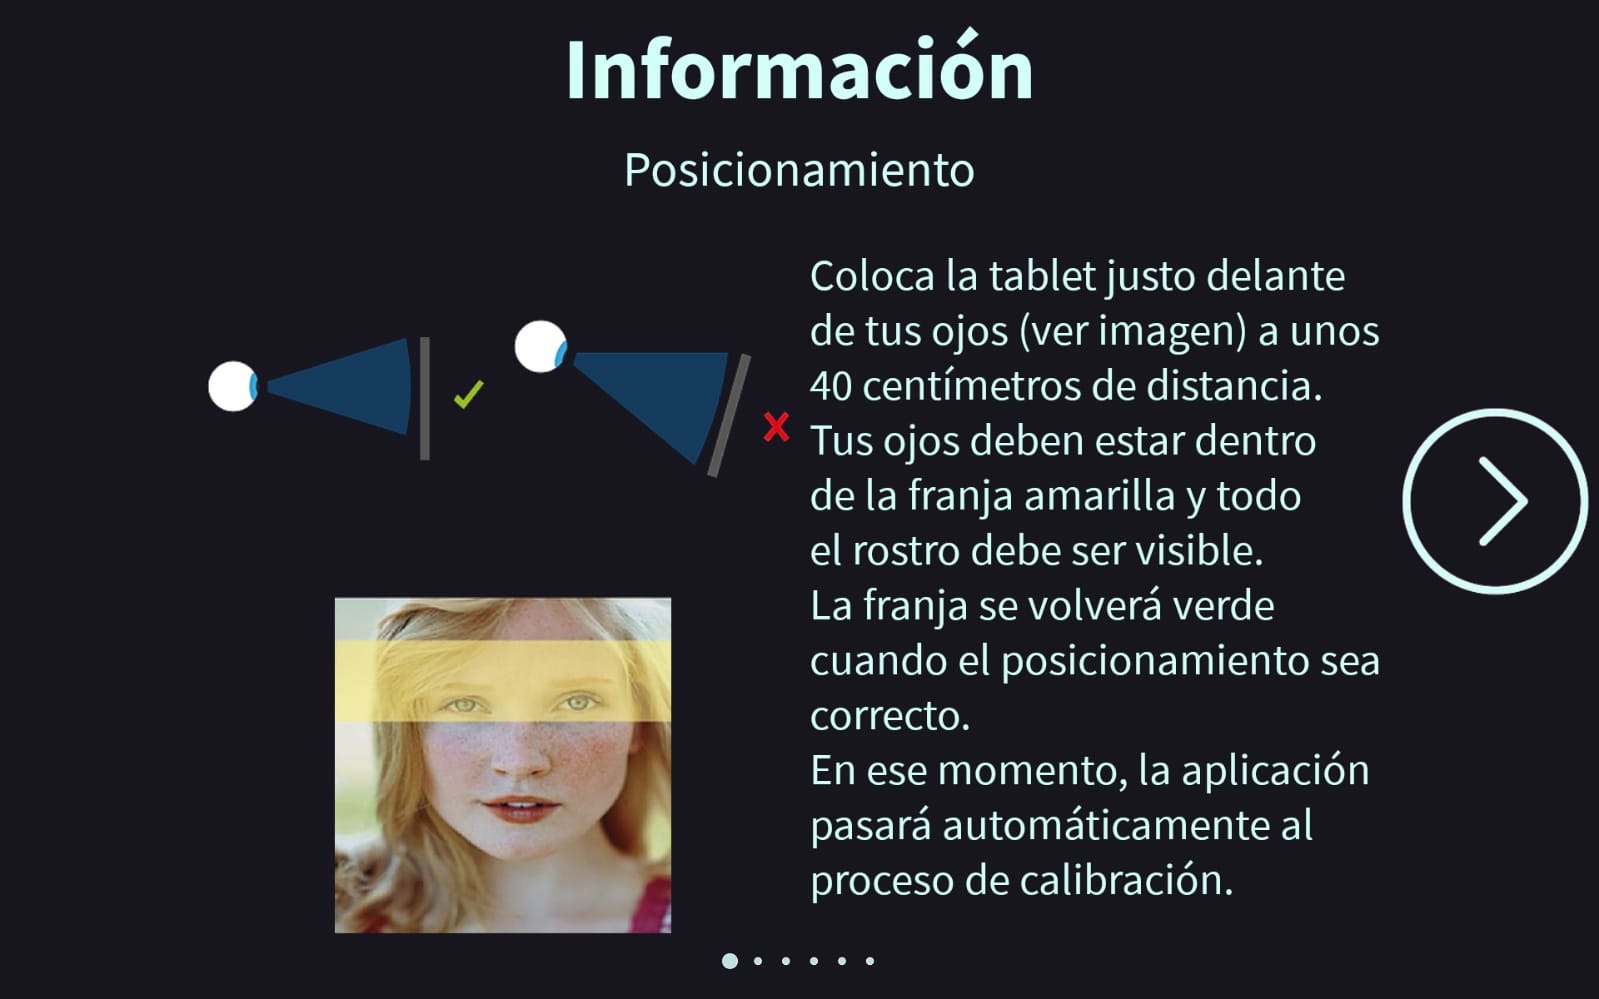 An information screen on how to position the tablet in relation to the user's eyes, must be at the same eye level and about 40 centimeters away.